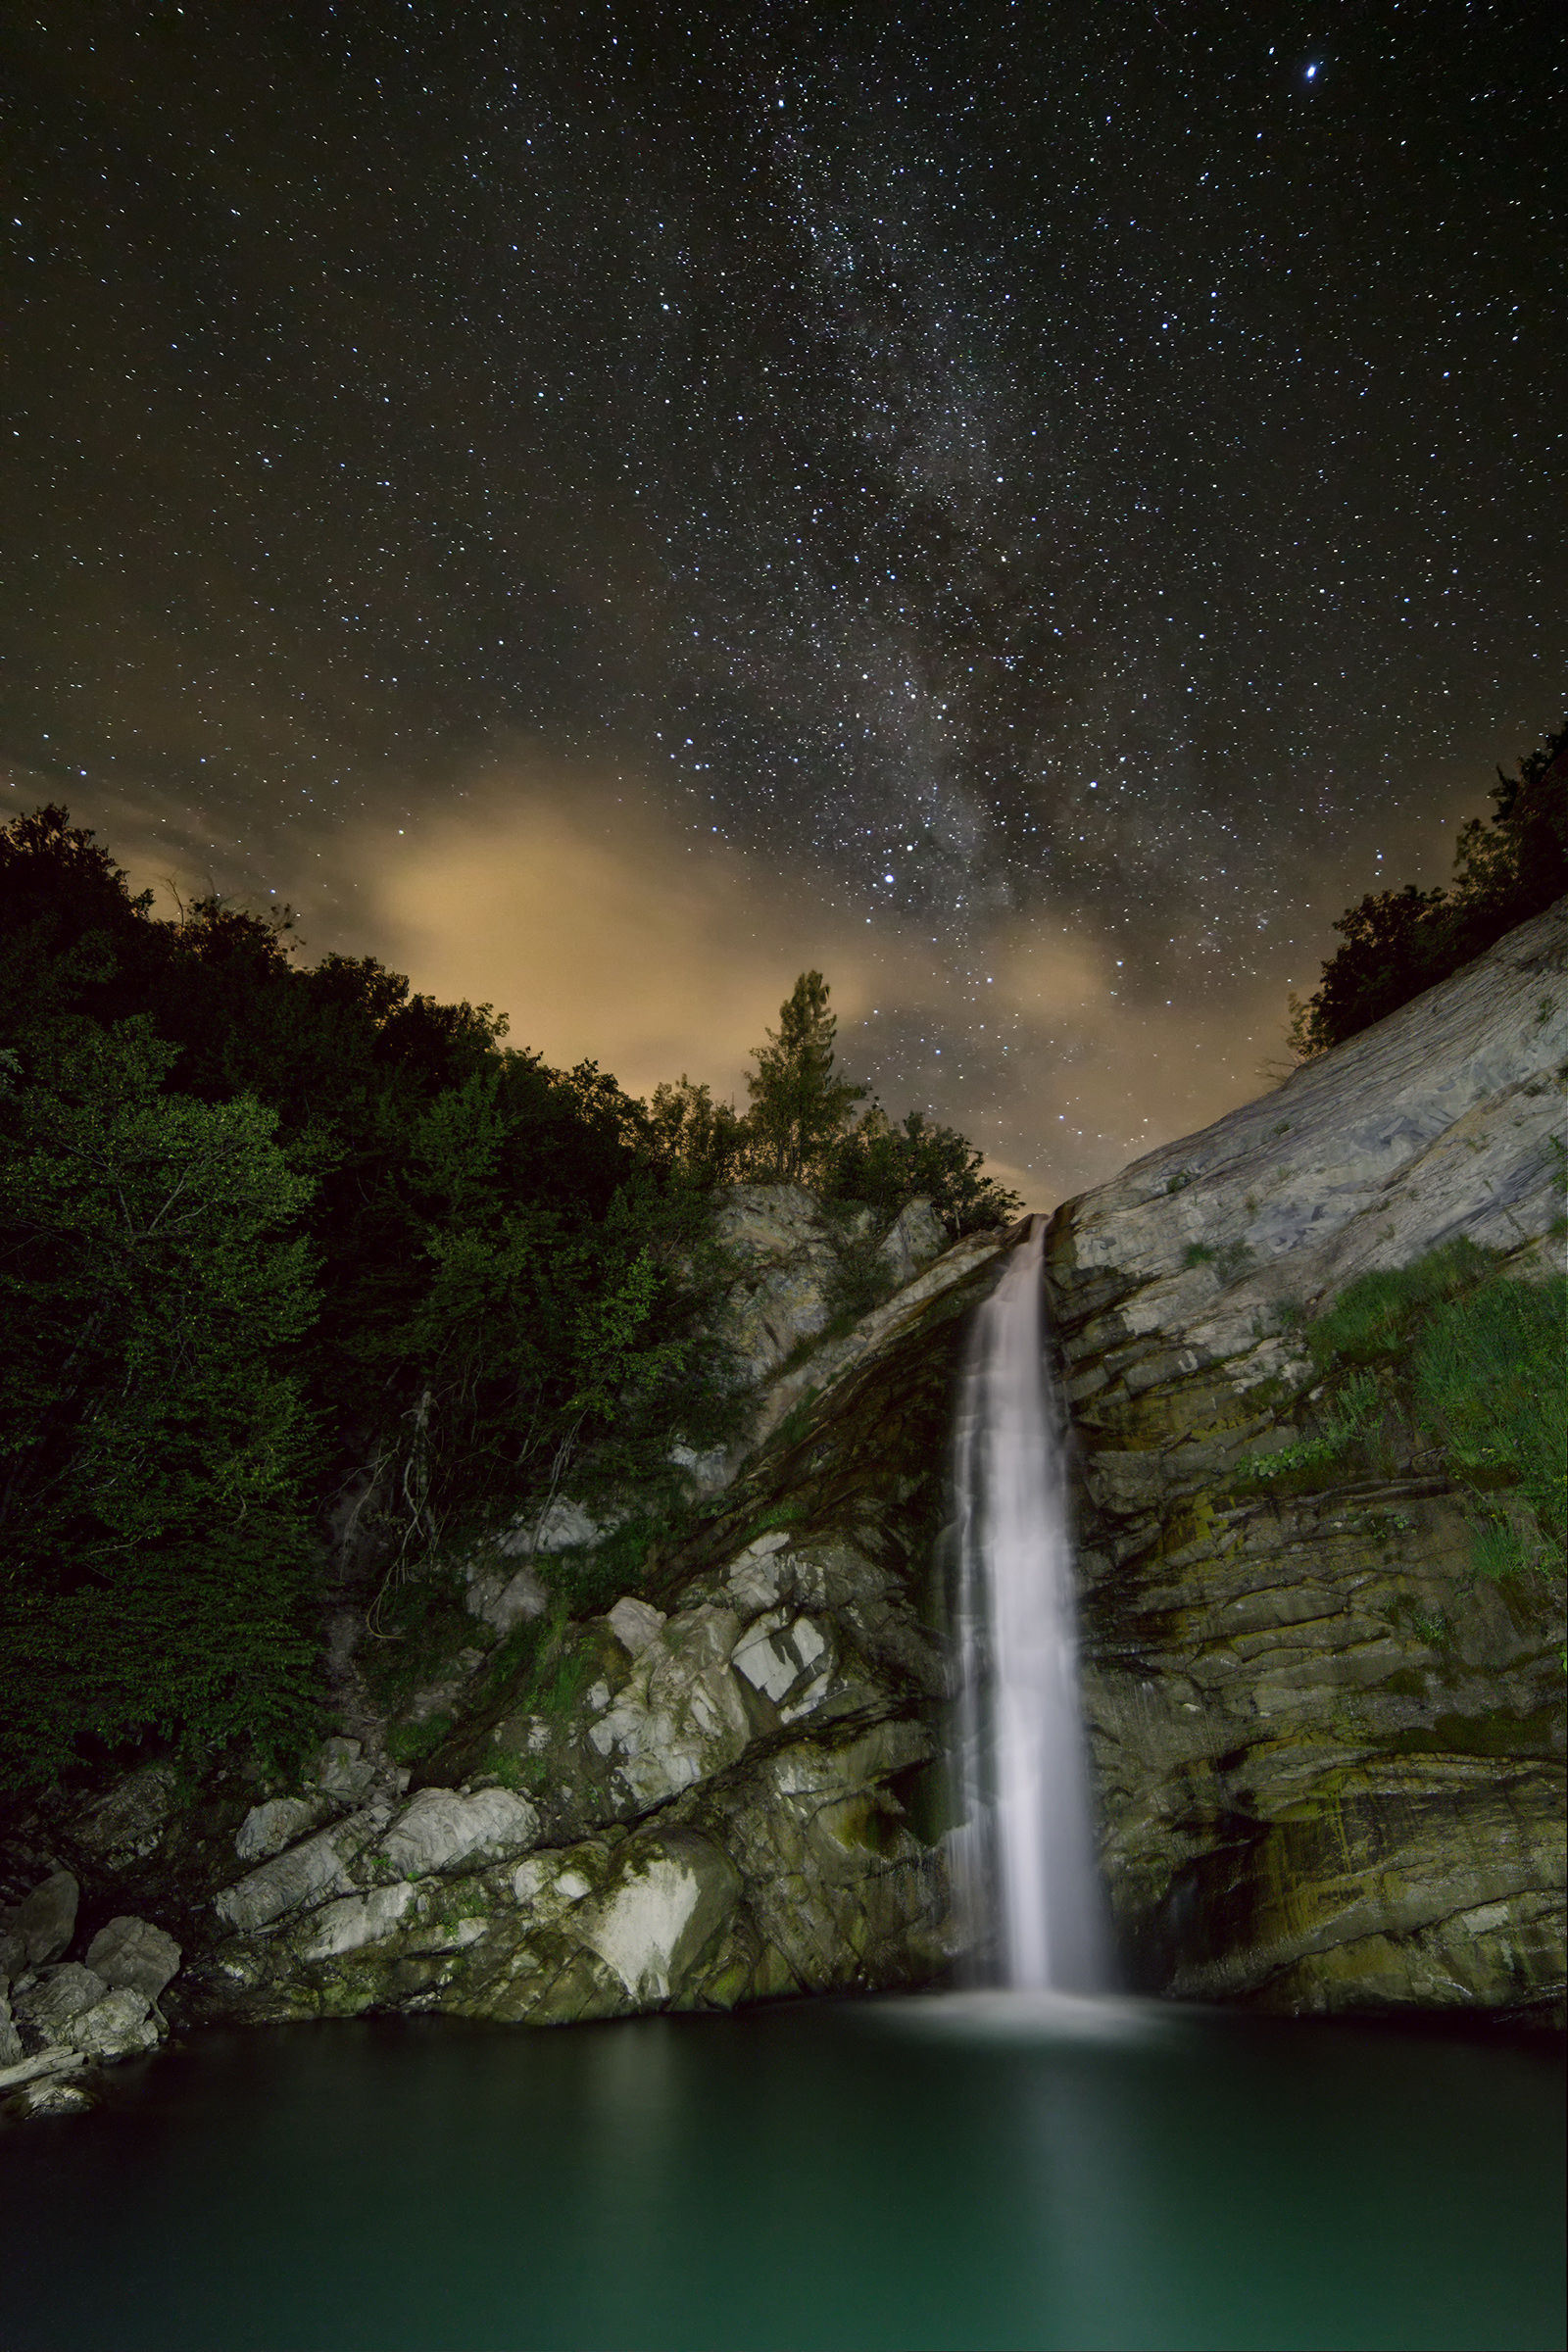 Milky way on the waterfall...